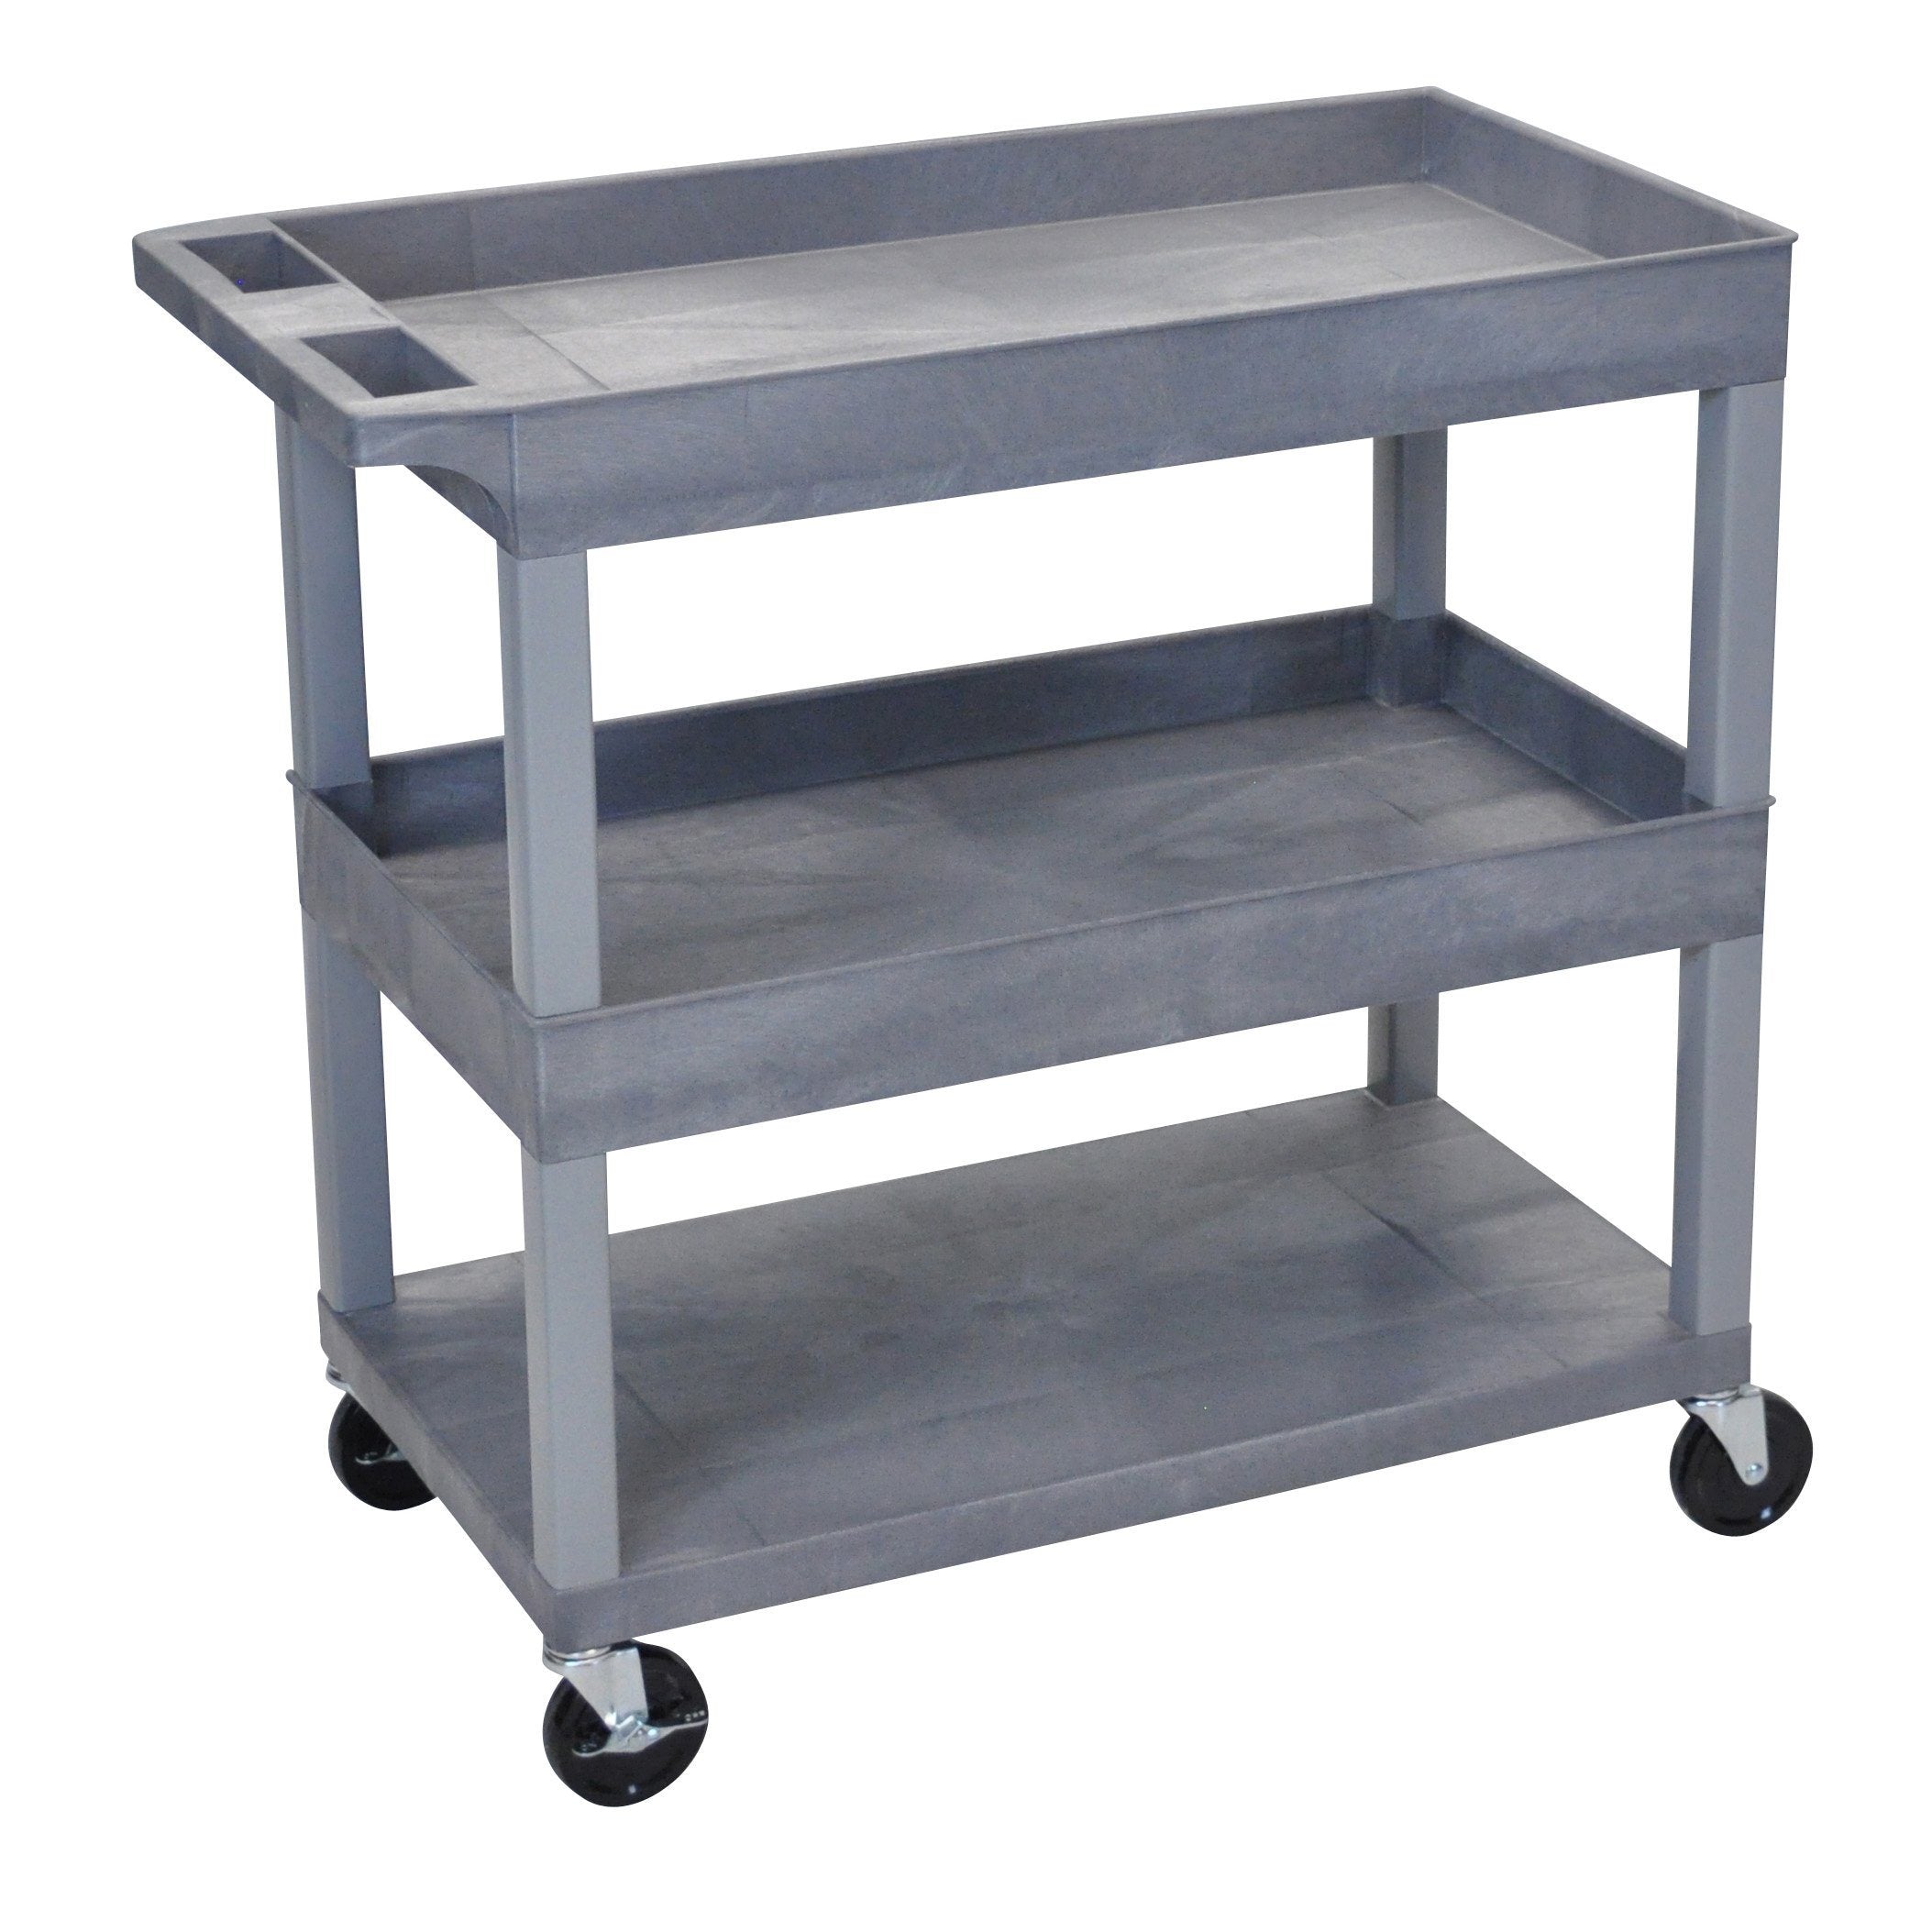 Luxor High Capacity 2 Tubs and 1 Flat Shelf Cart in Gray